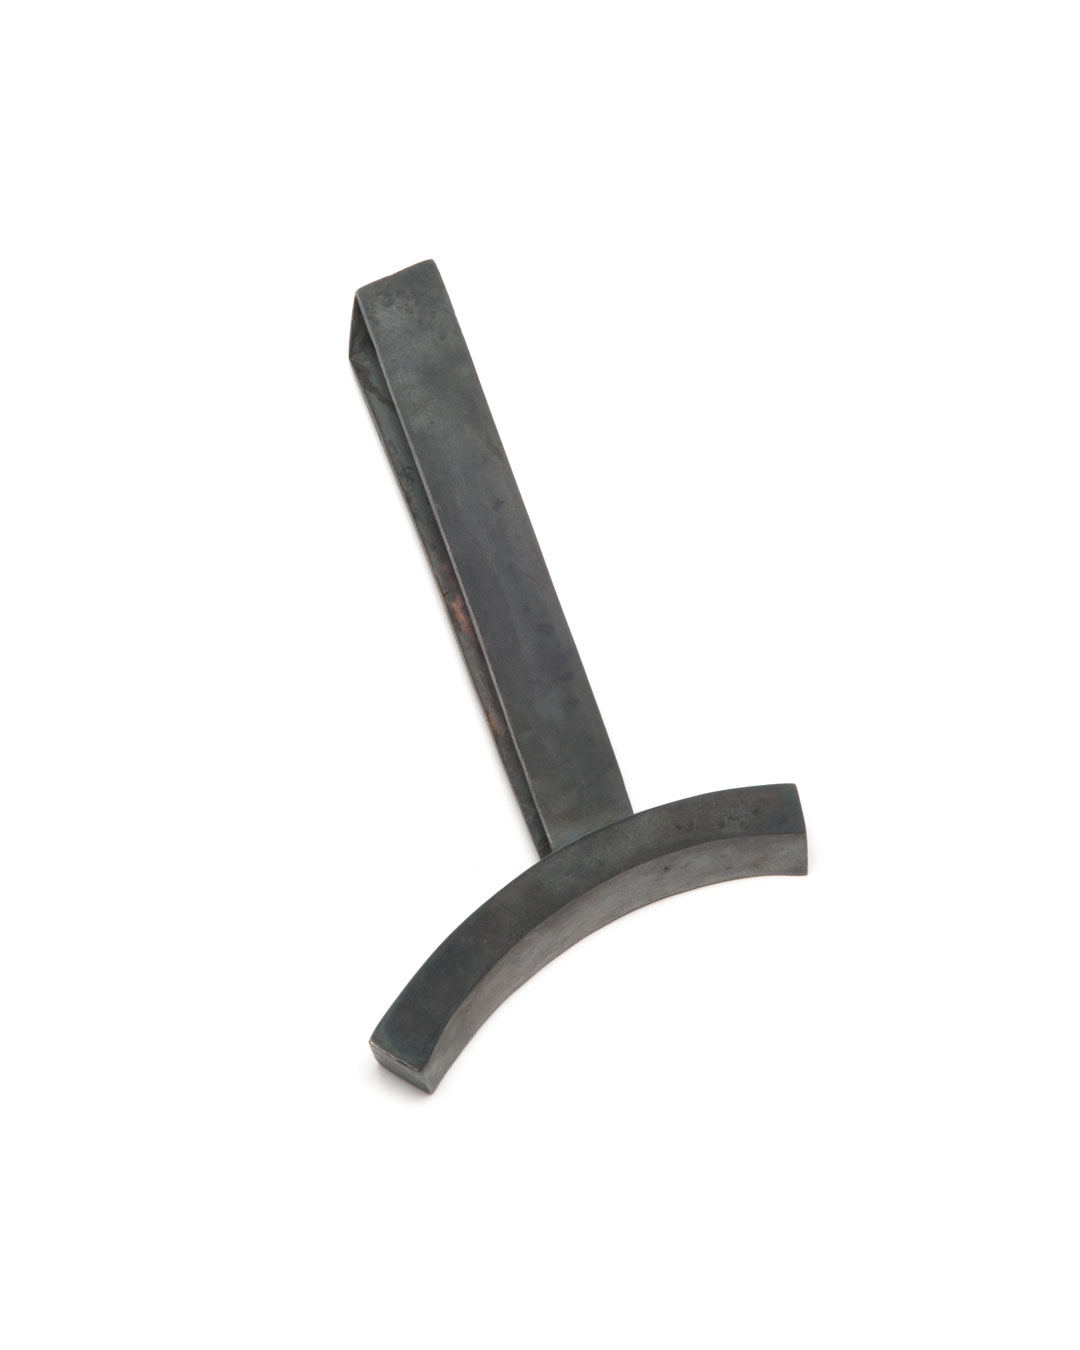 Winfried Krüger, untitled, 1986, brooch; oxidised silver, lacquer, 120 x 60 mm, €1210